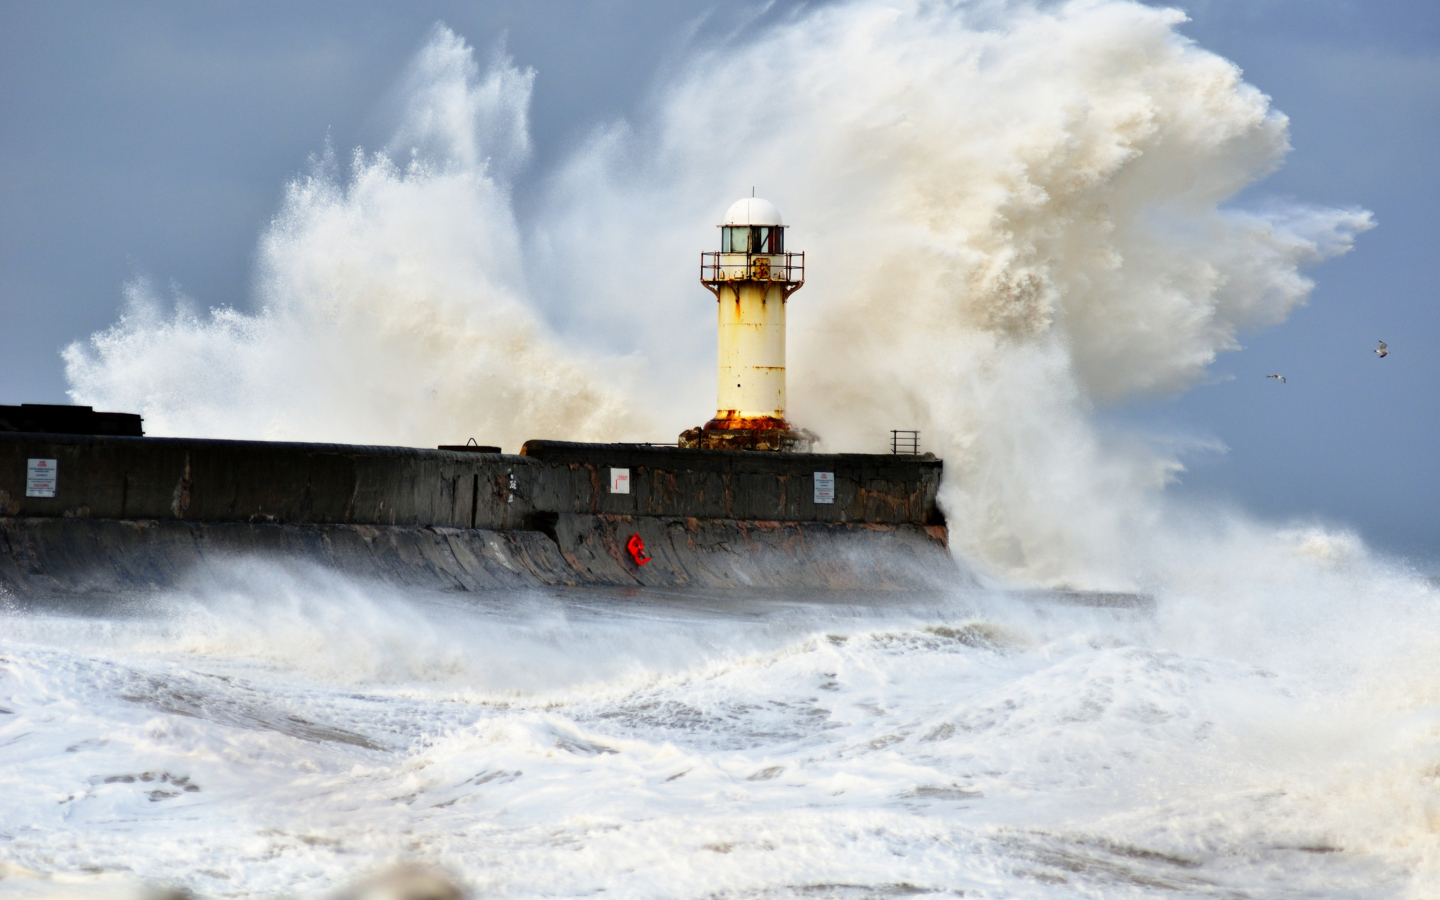 Crazy Storm And Old Lighthouse wallpaper 1440x900